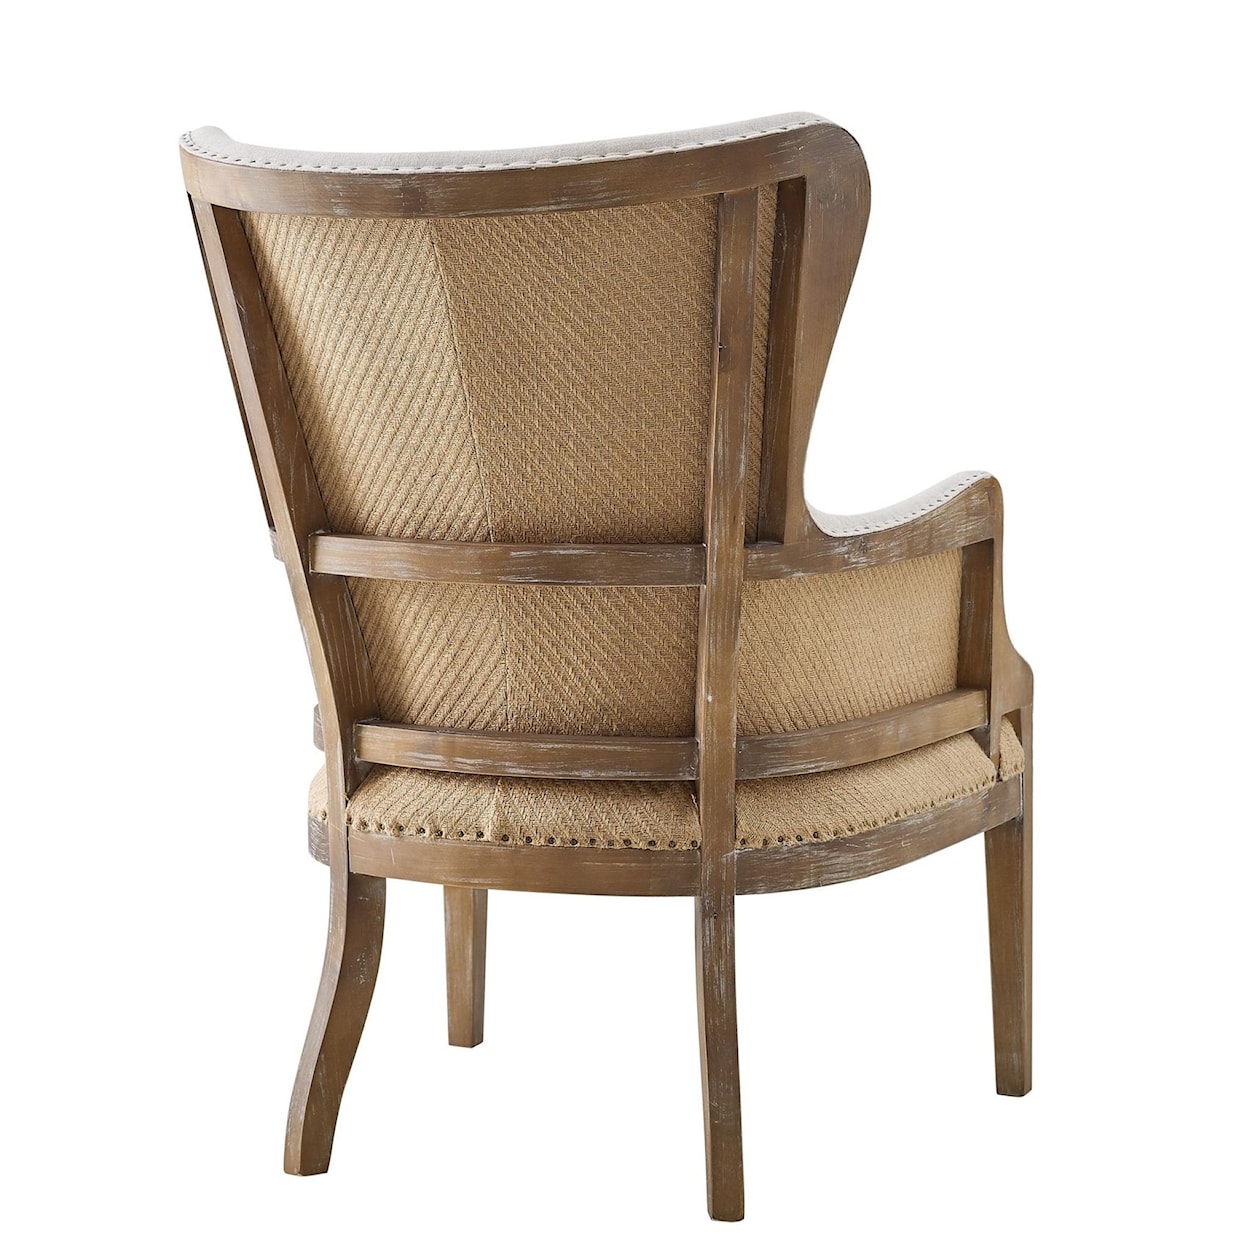 Steve Silver George Wingback Accent Chair